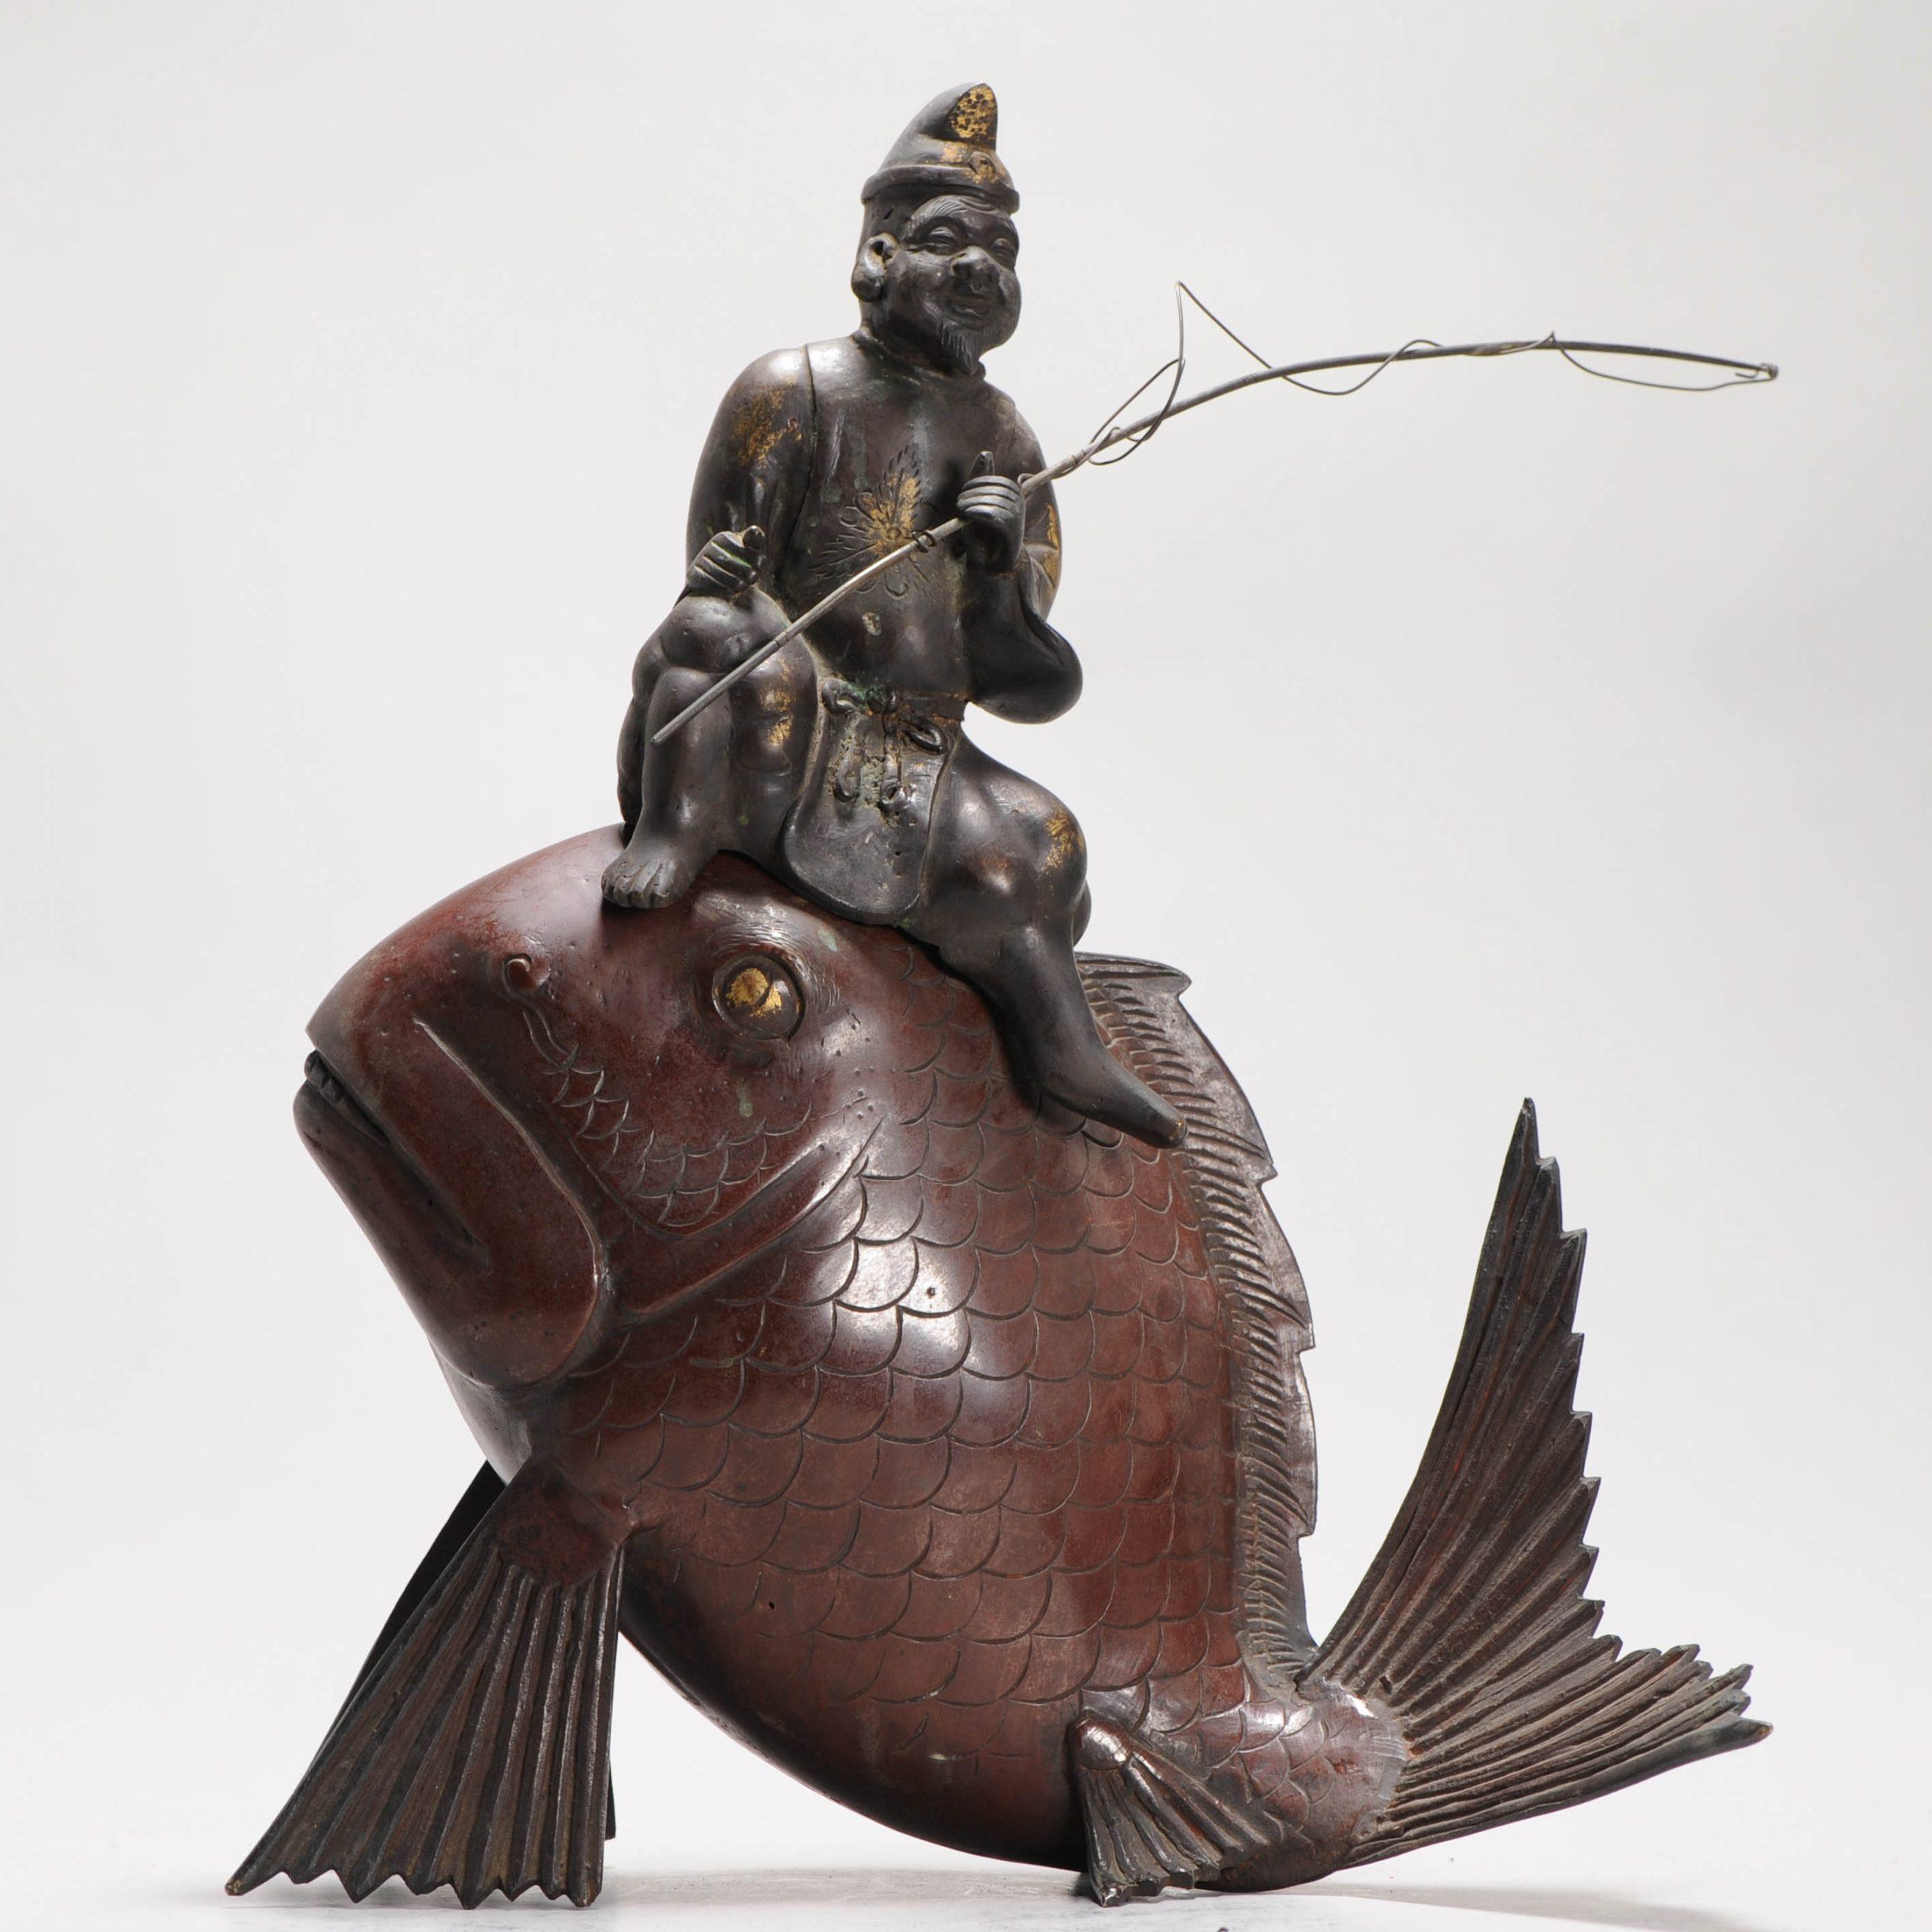 a very nice statue of a fisherman on a fish

Condition
40 x 35 cm. Good condition with sign of ware.
Period
19th century 